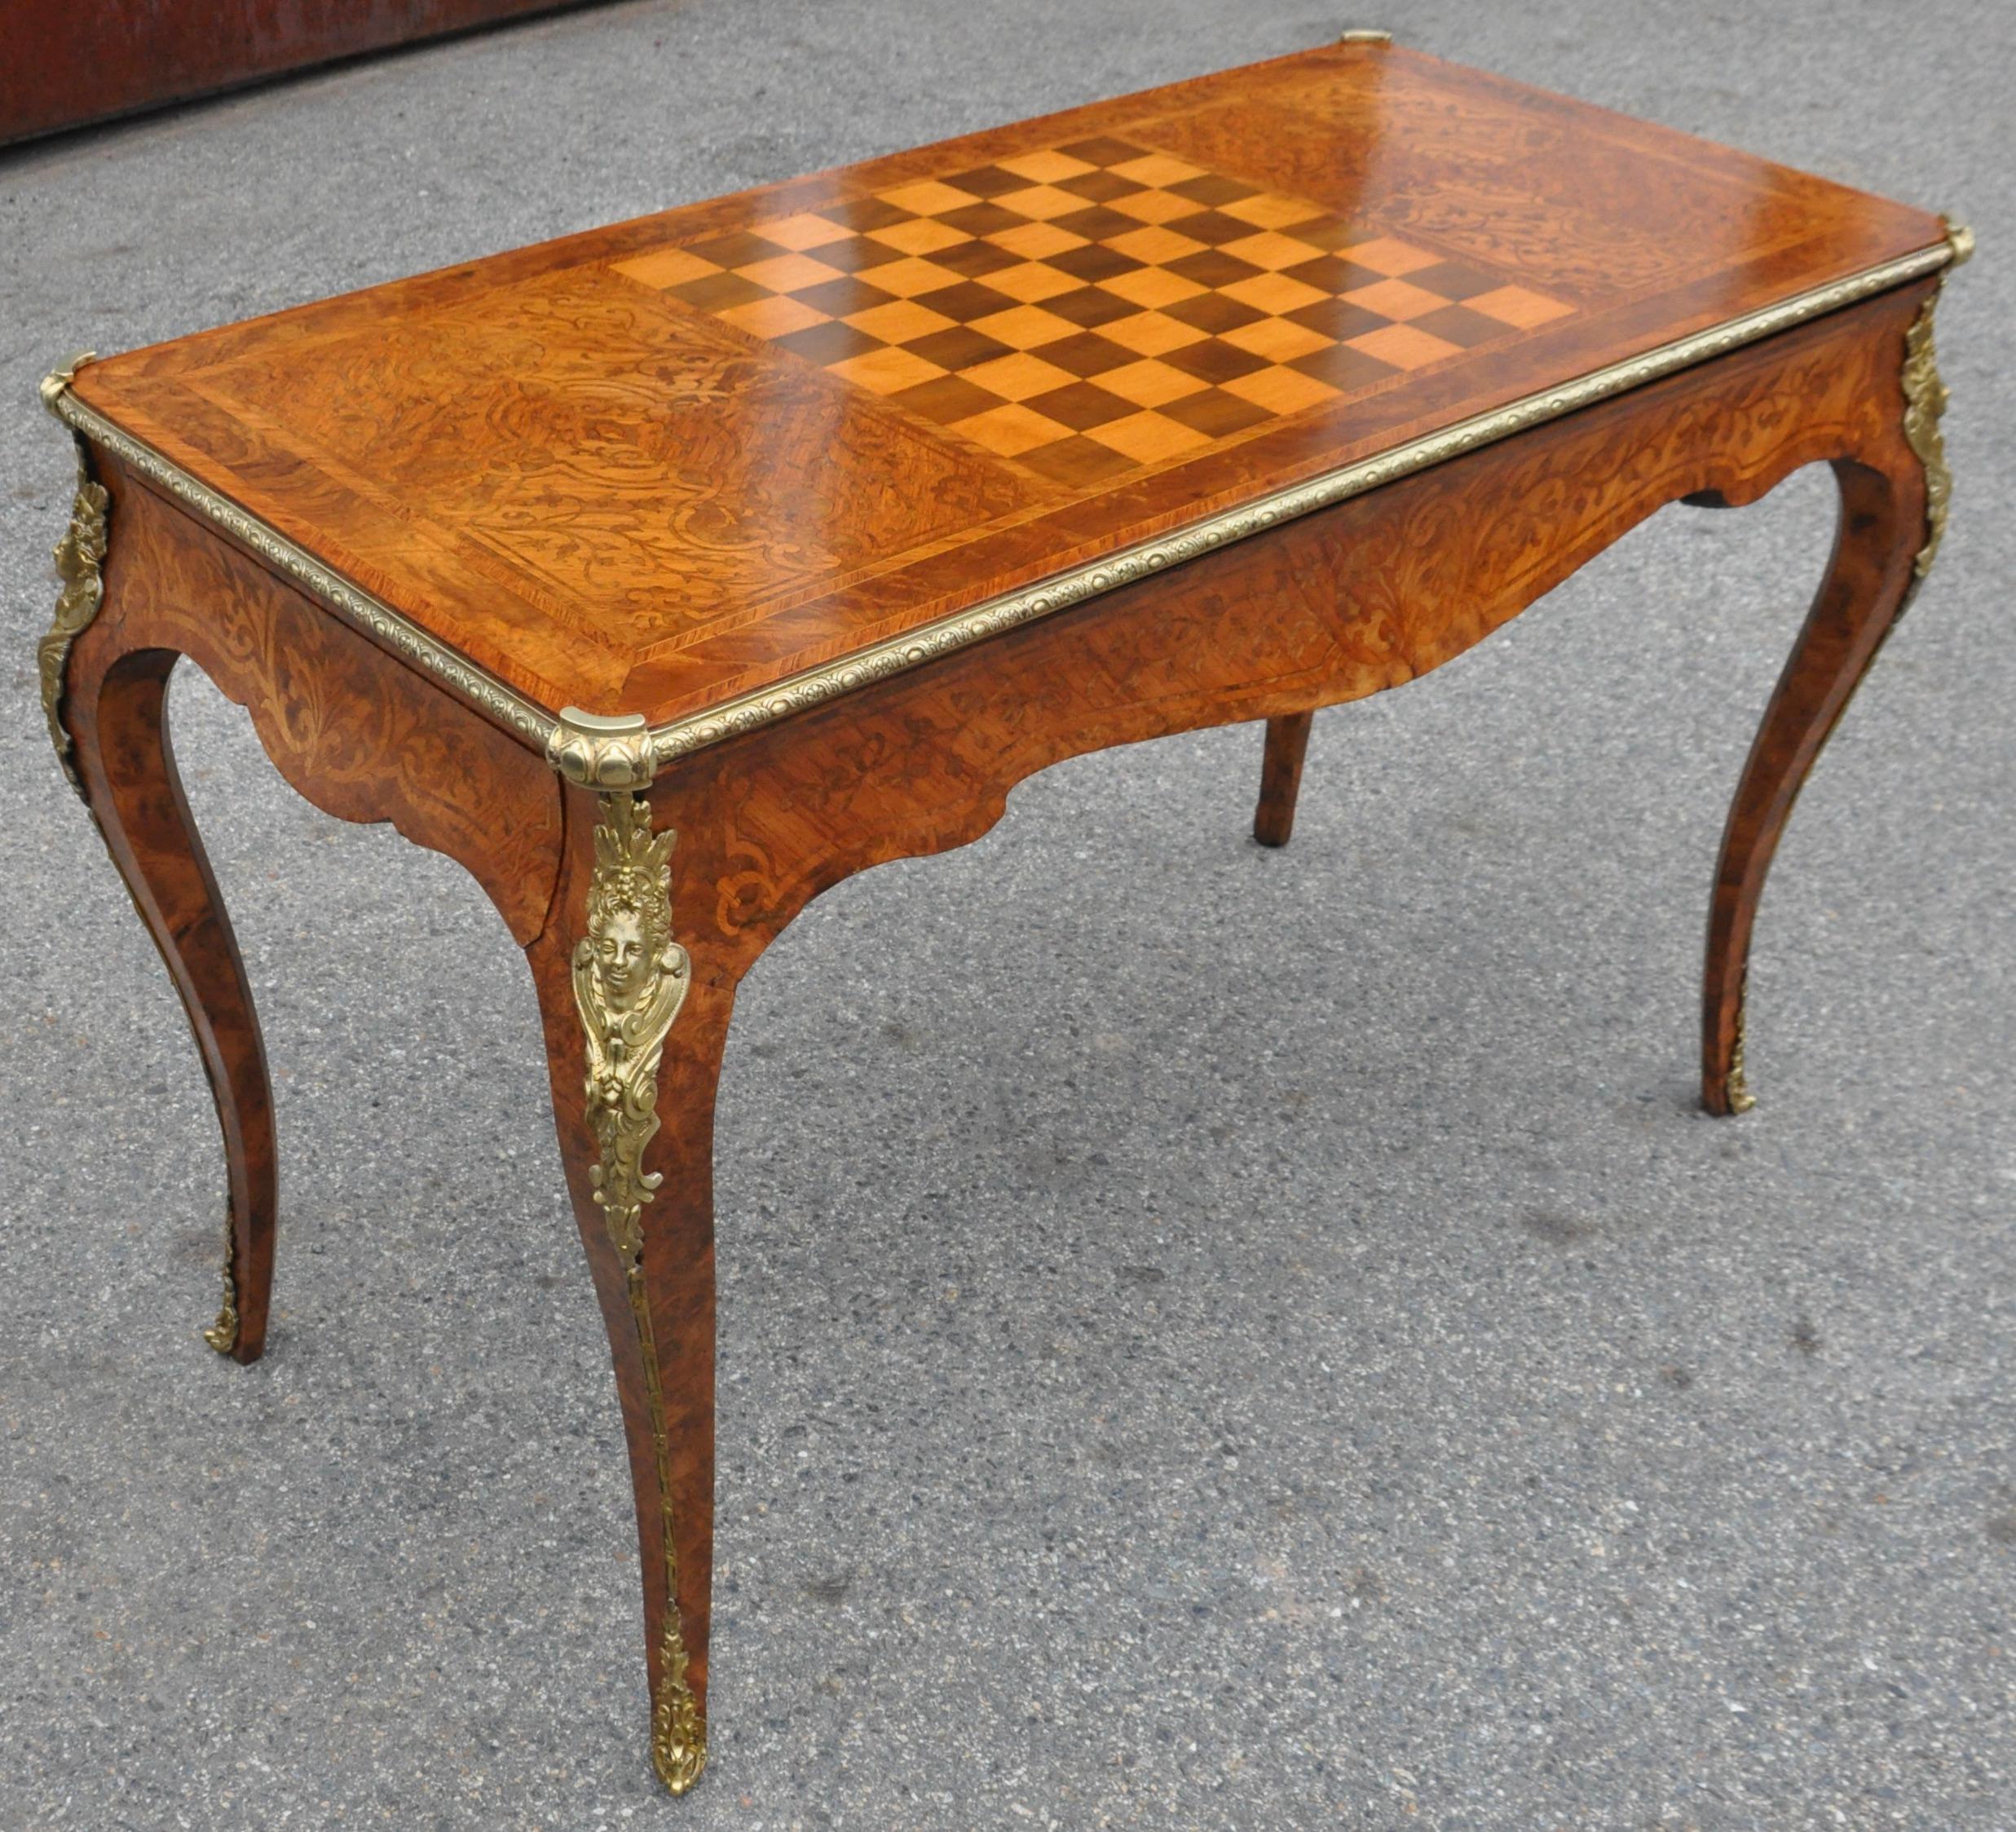 Fine 19th Century French Kingwood Regence Style Backgammon Games Table. Referred to as Tric-Trac. Kingwood and figured walnut marquetry inlay. Regence bronze mounts. Ebony with bone inlaid backgammon well. Candle cups. Bronze framed top with leather